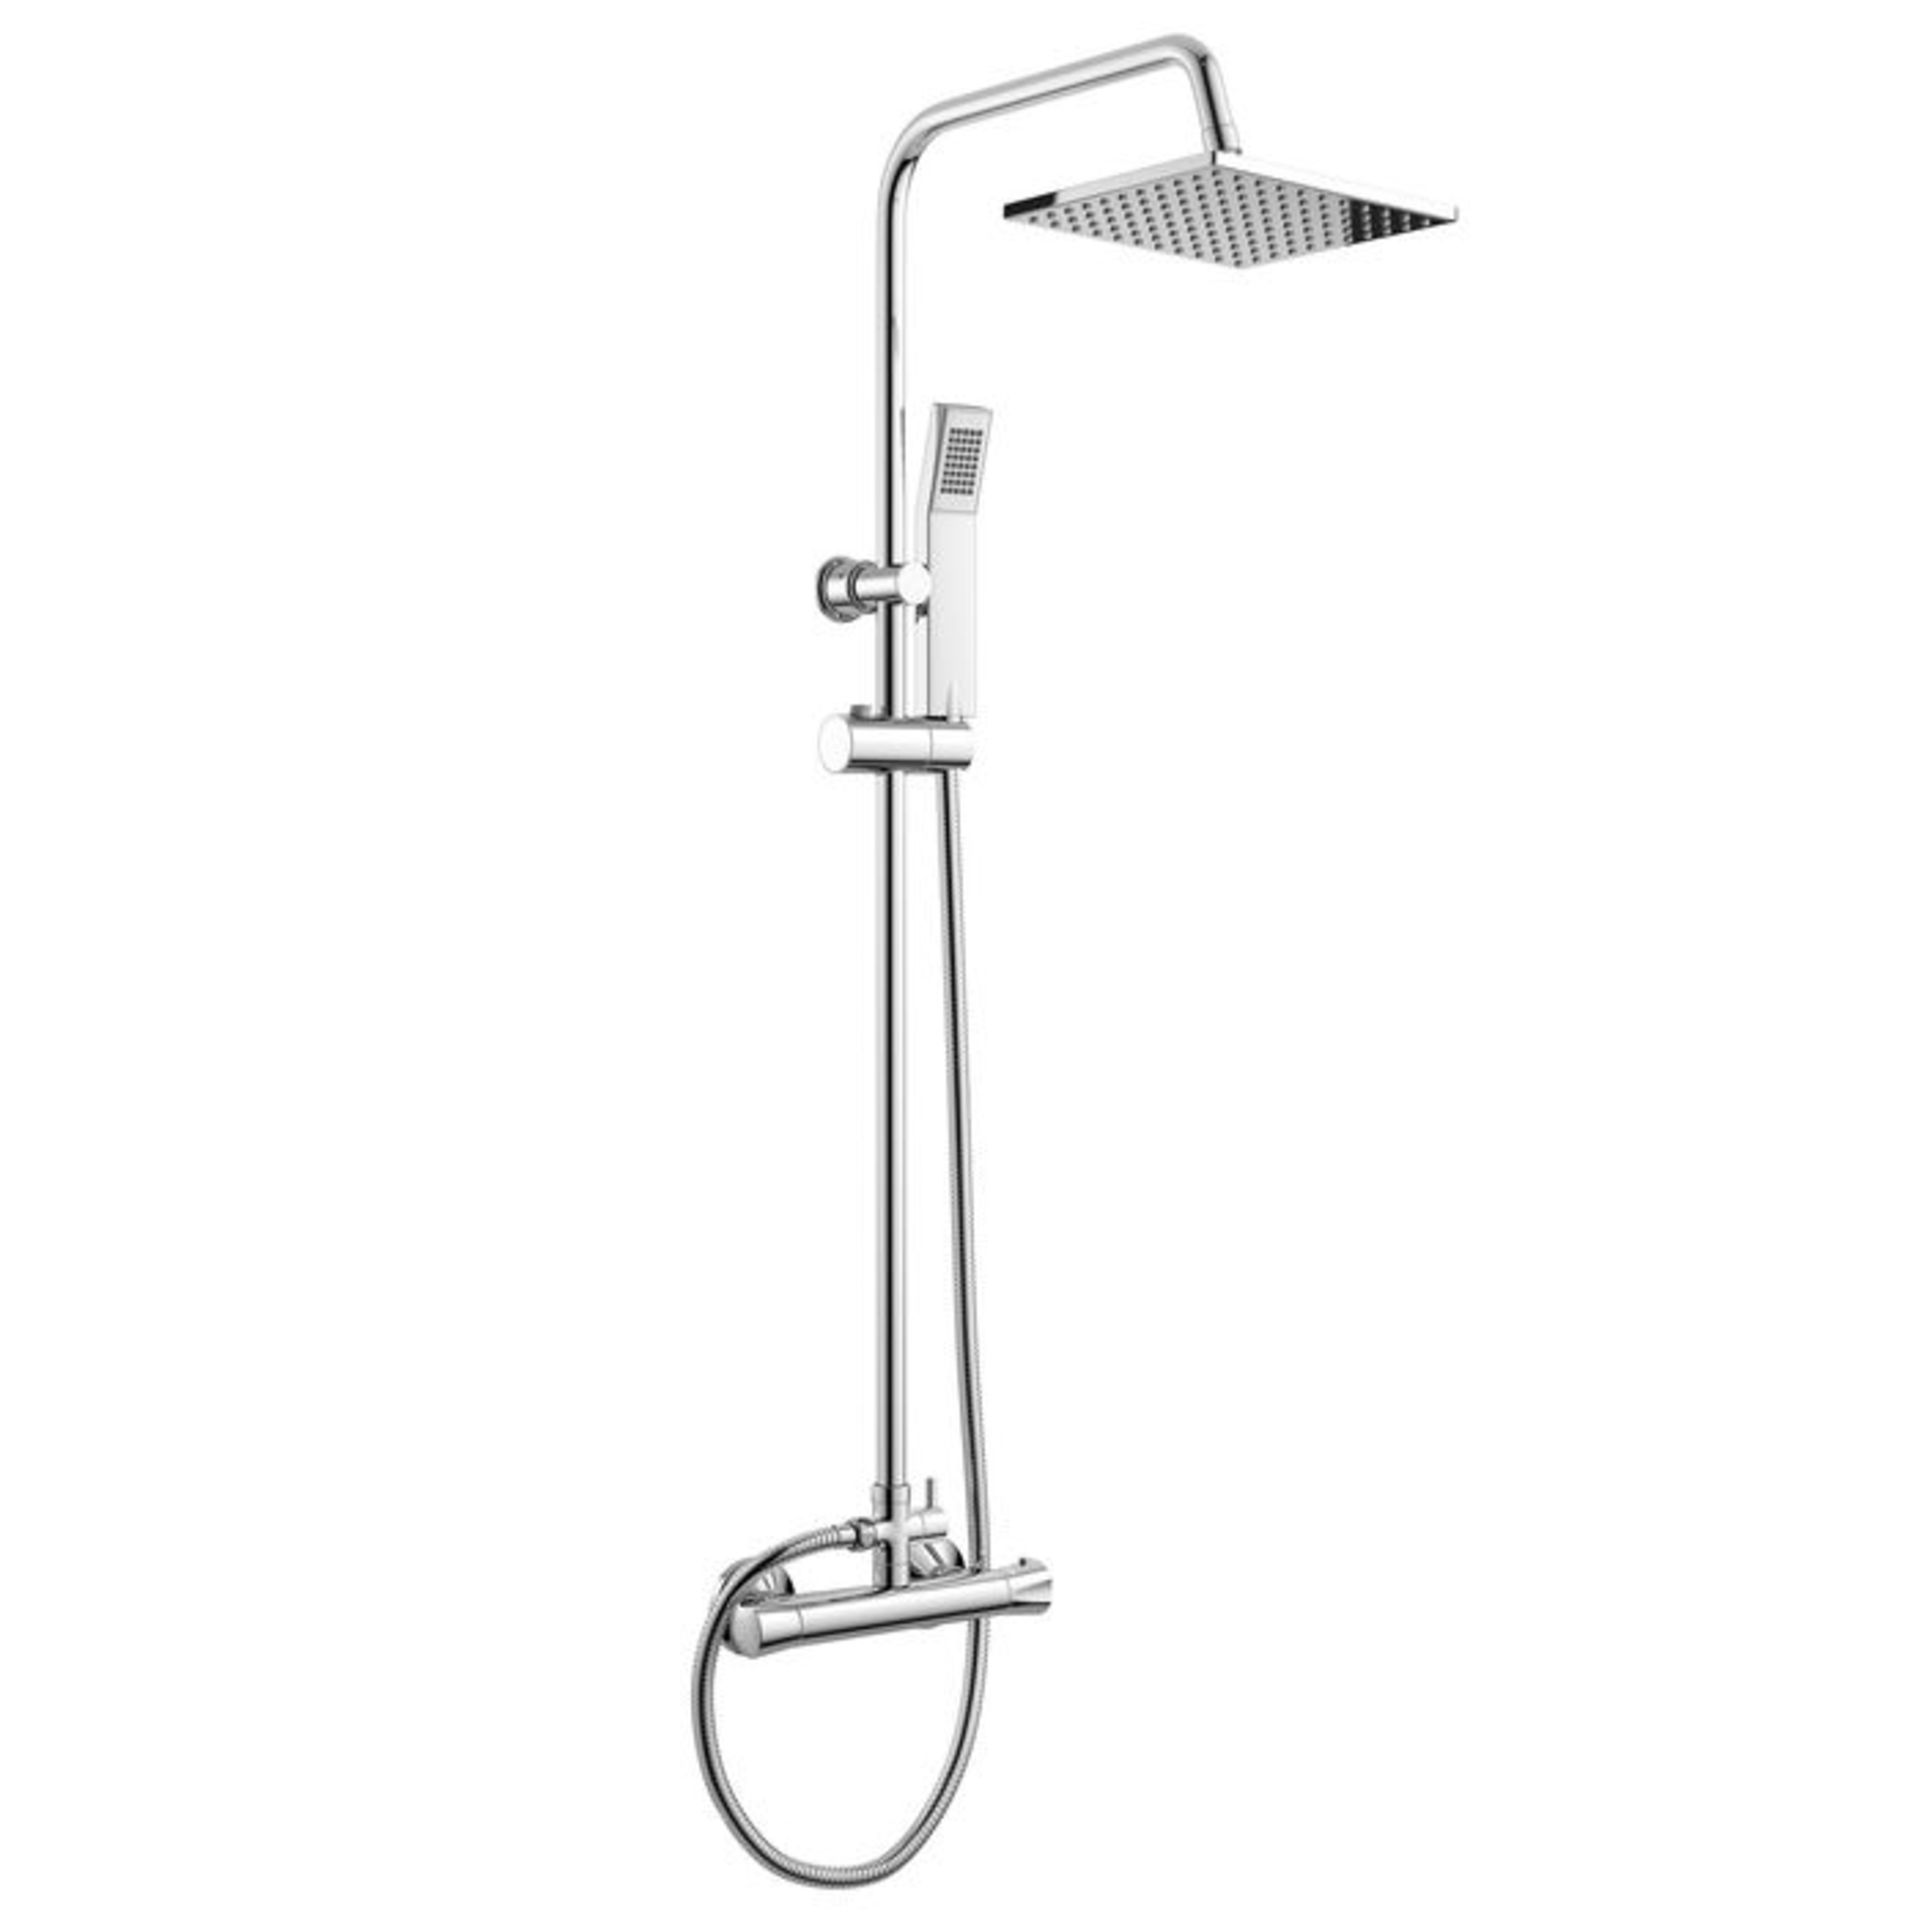 (PT62) Square Exposed Thermostatic Shower Kit & Head. Curved features and contemporary rounded